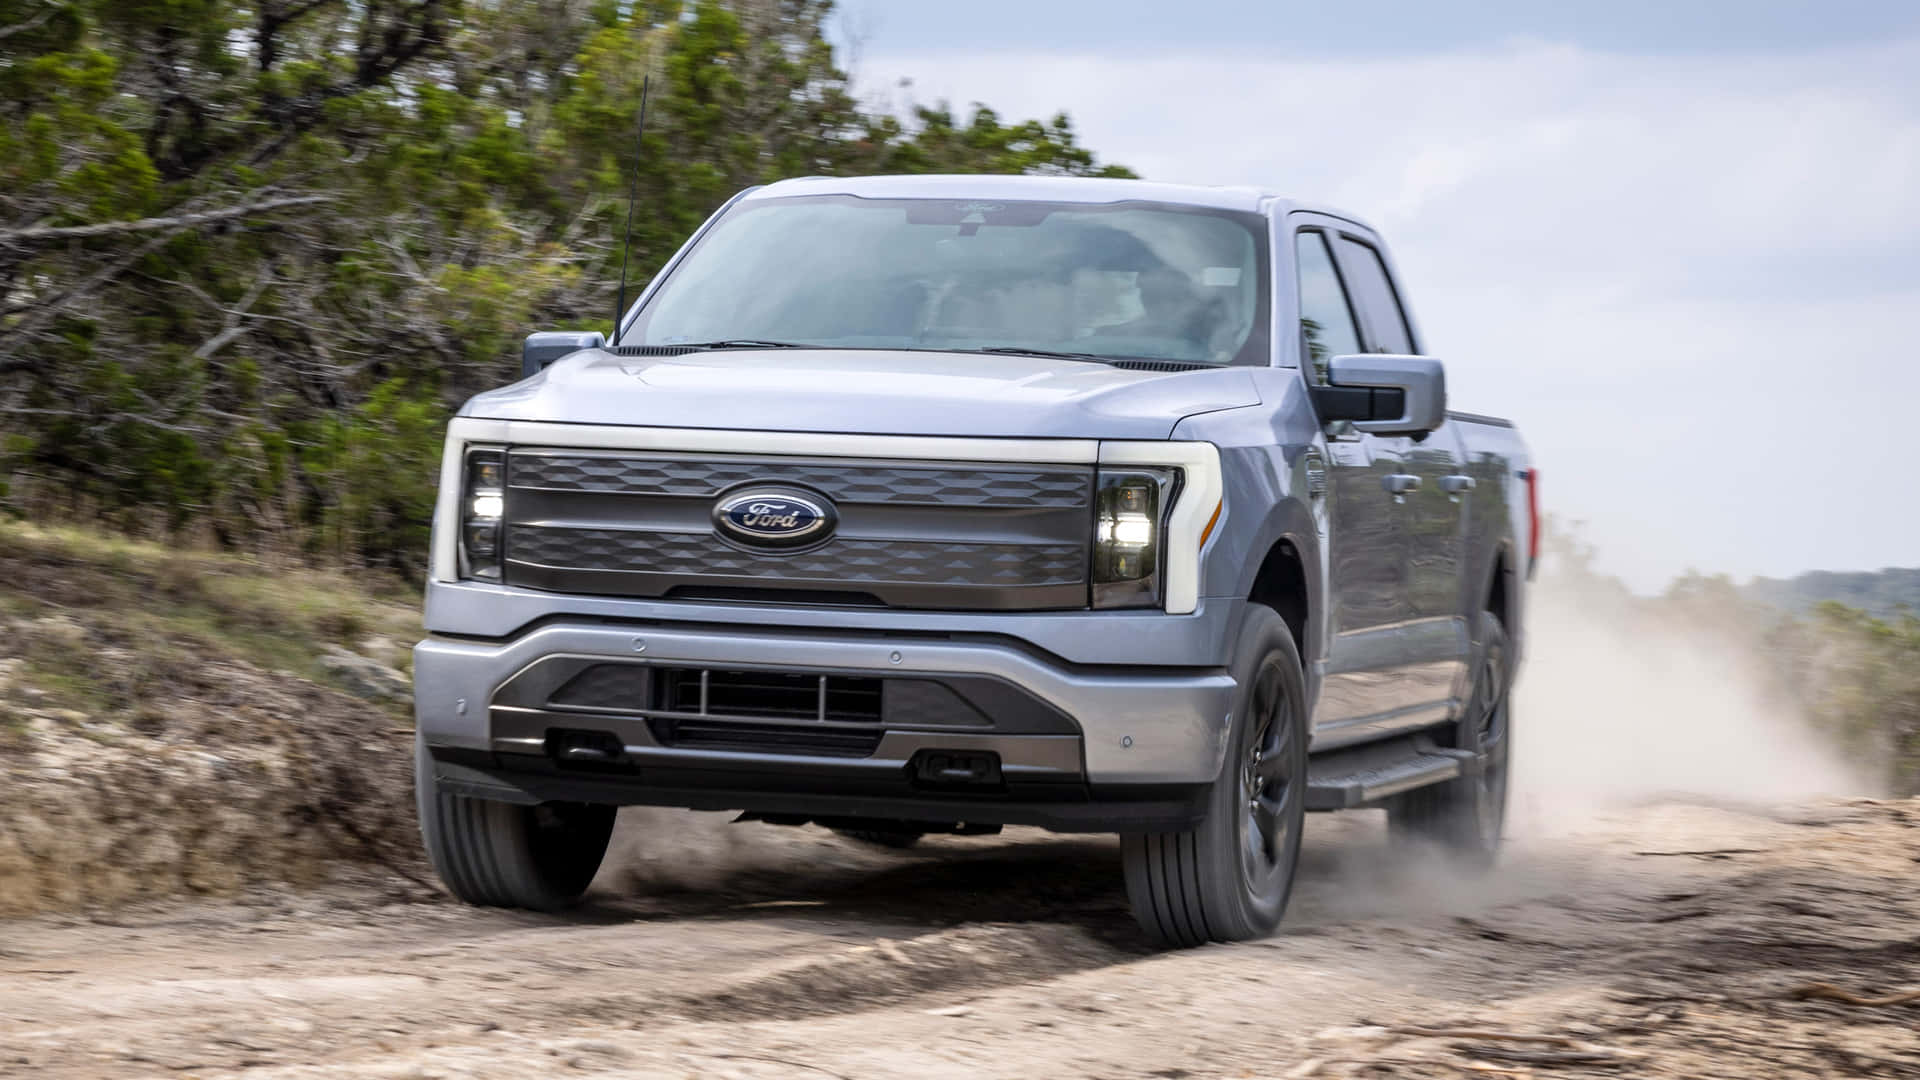 The 2019 Ford F - 150 Is Driving Down A Dirt Road